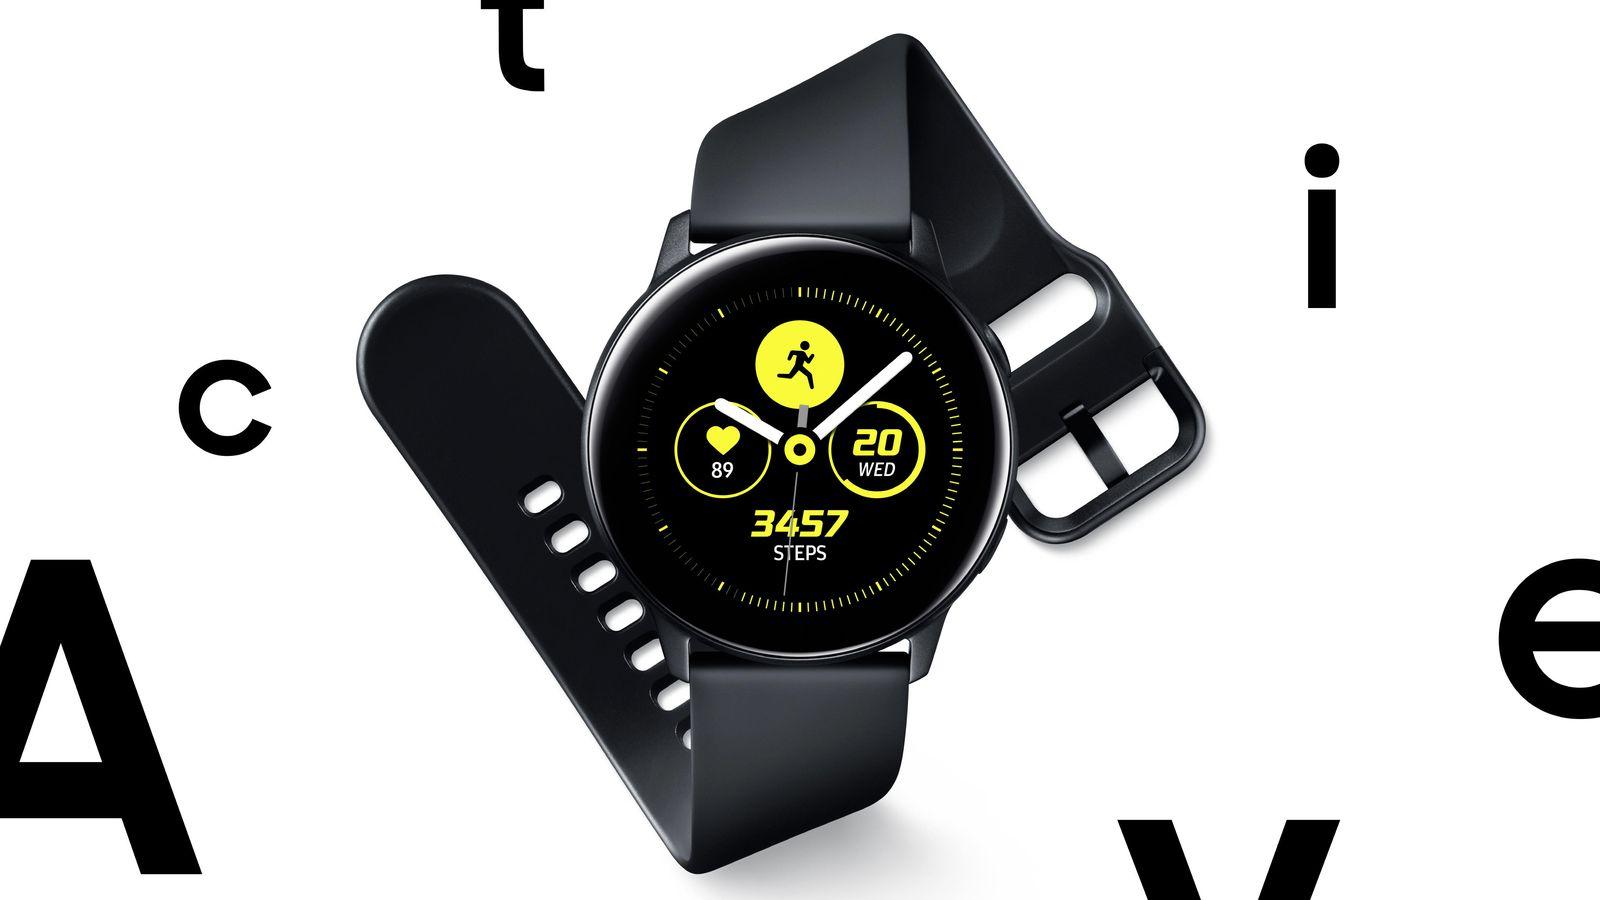 Galaxy Watch Active, Galaxy Fit: When, where, how to buy